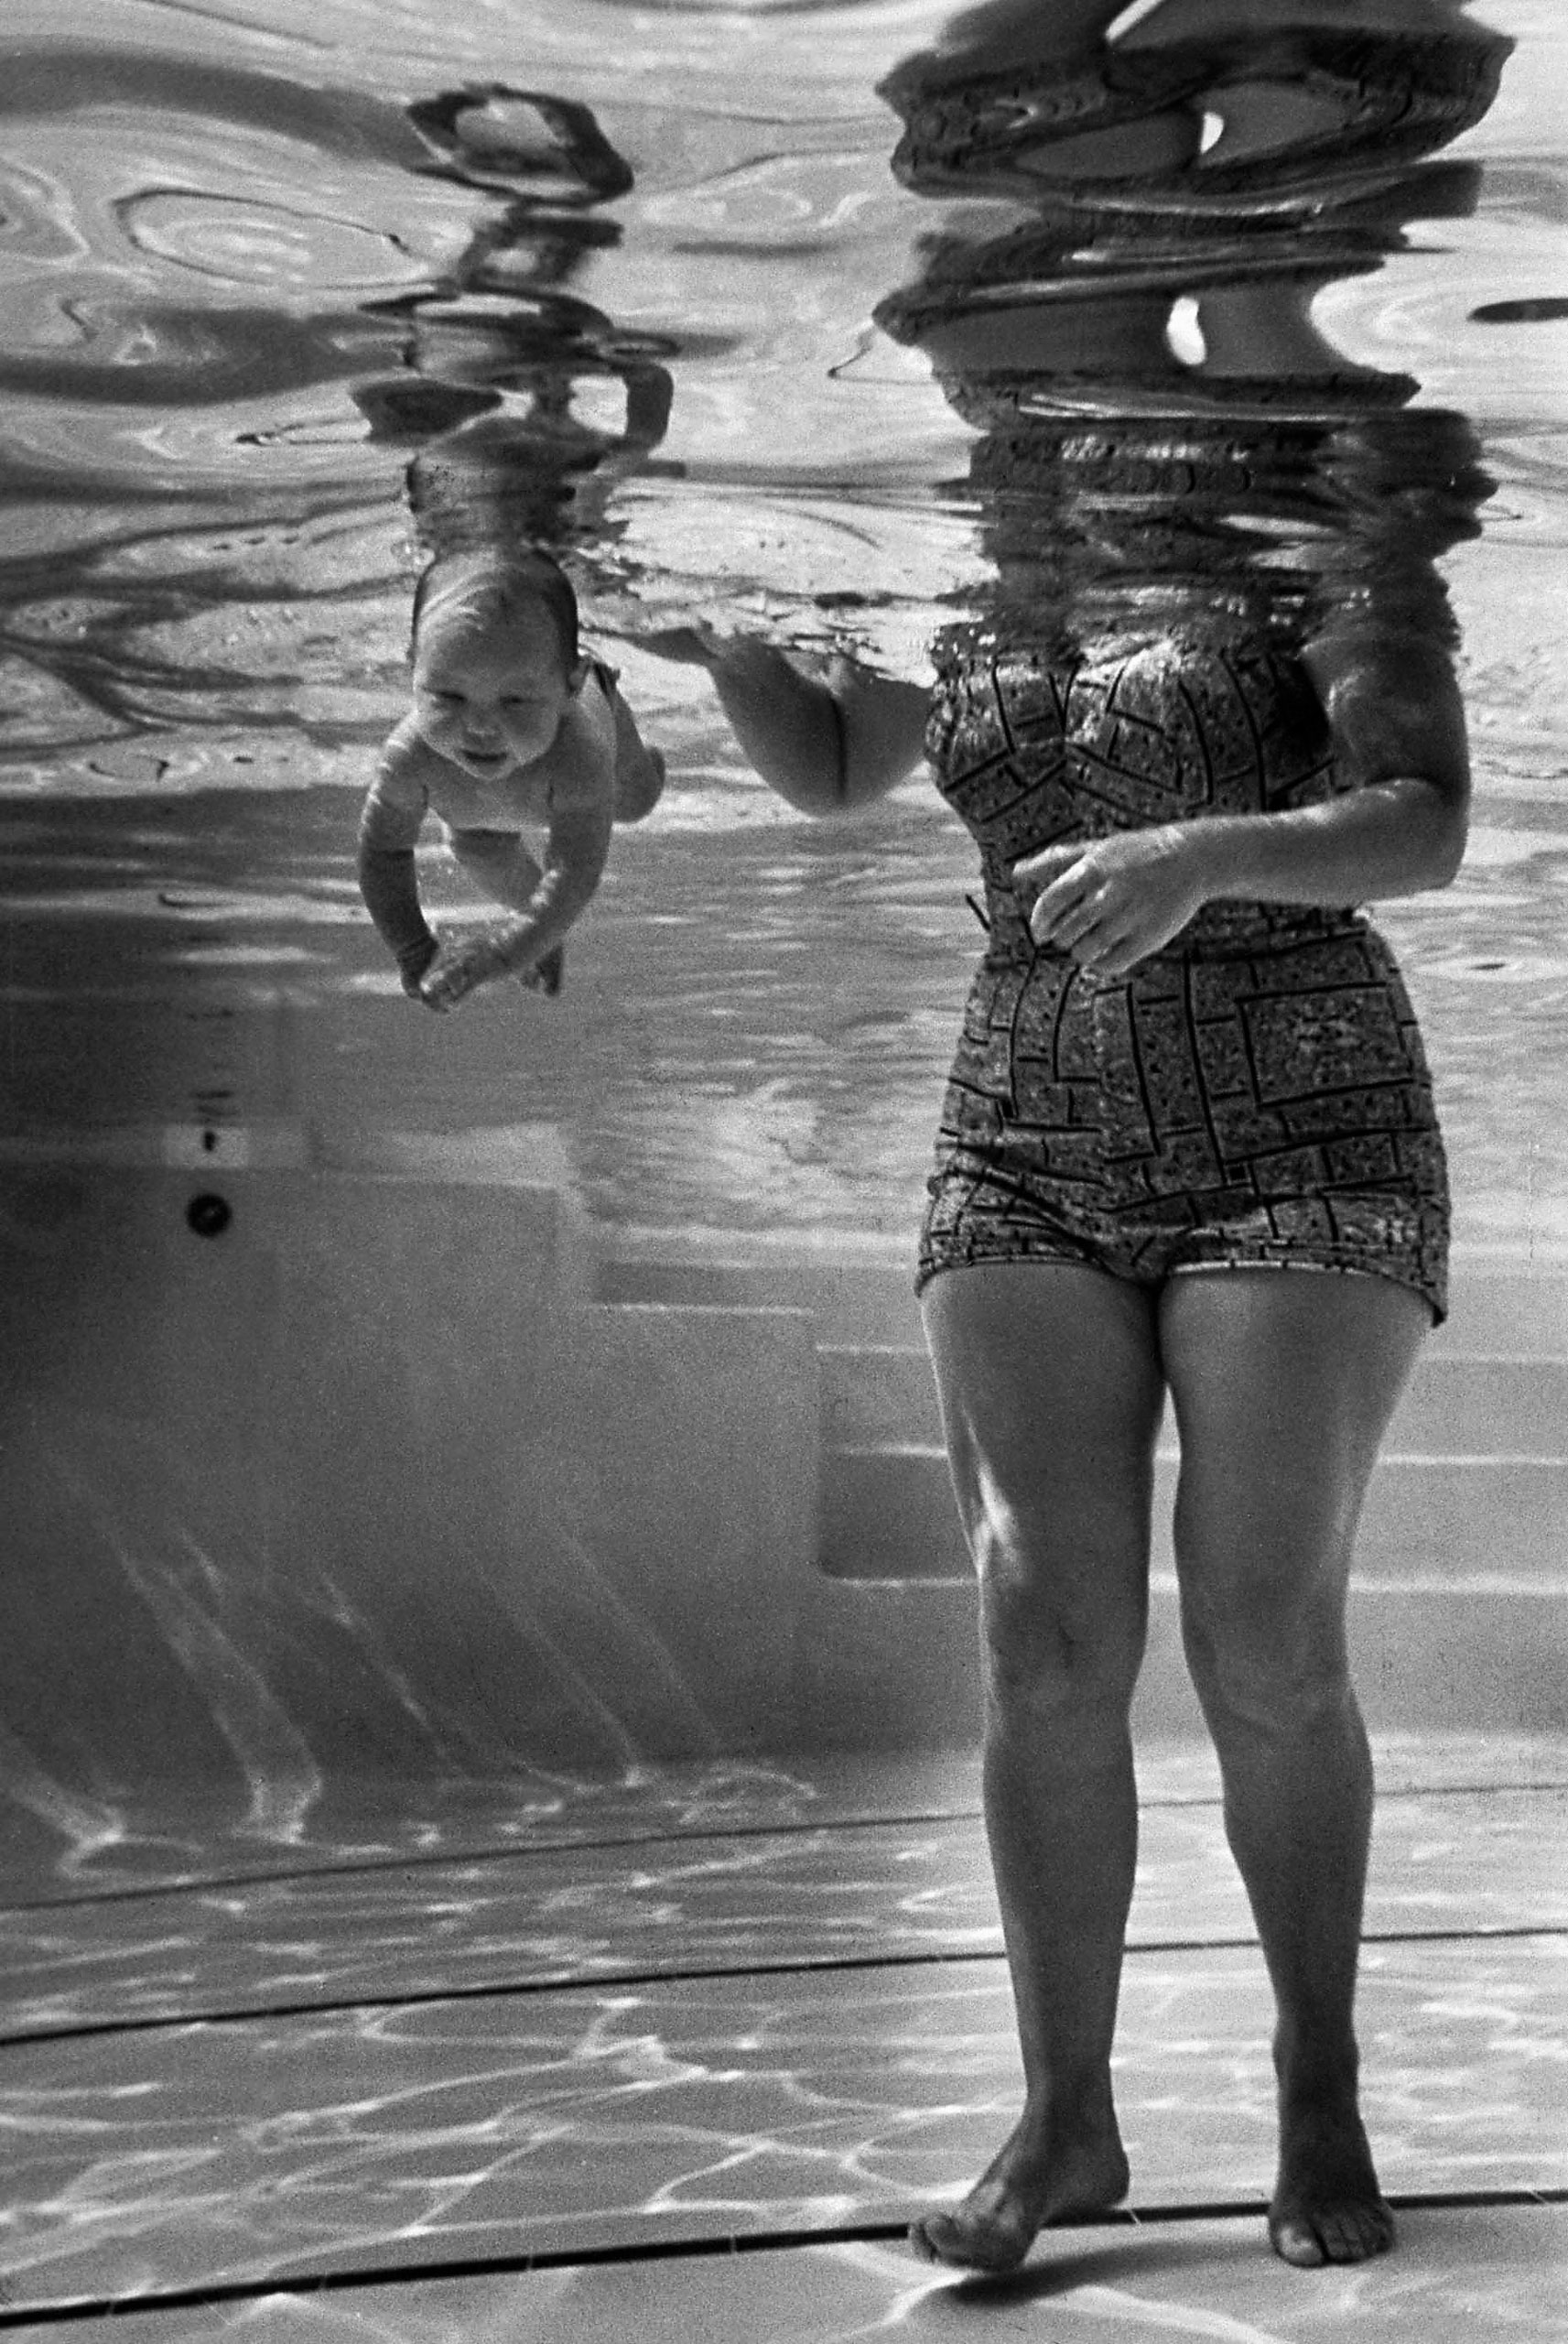 The "world's youngest swimmer," 9-week-old Julie Sheldon, cruises underwater next to her grandmother, Mrs. Jen Loven, a children's swimming instructor in 1954 Los Angeles.